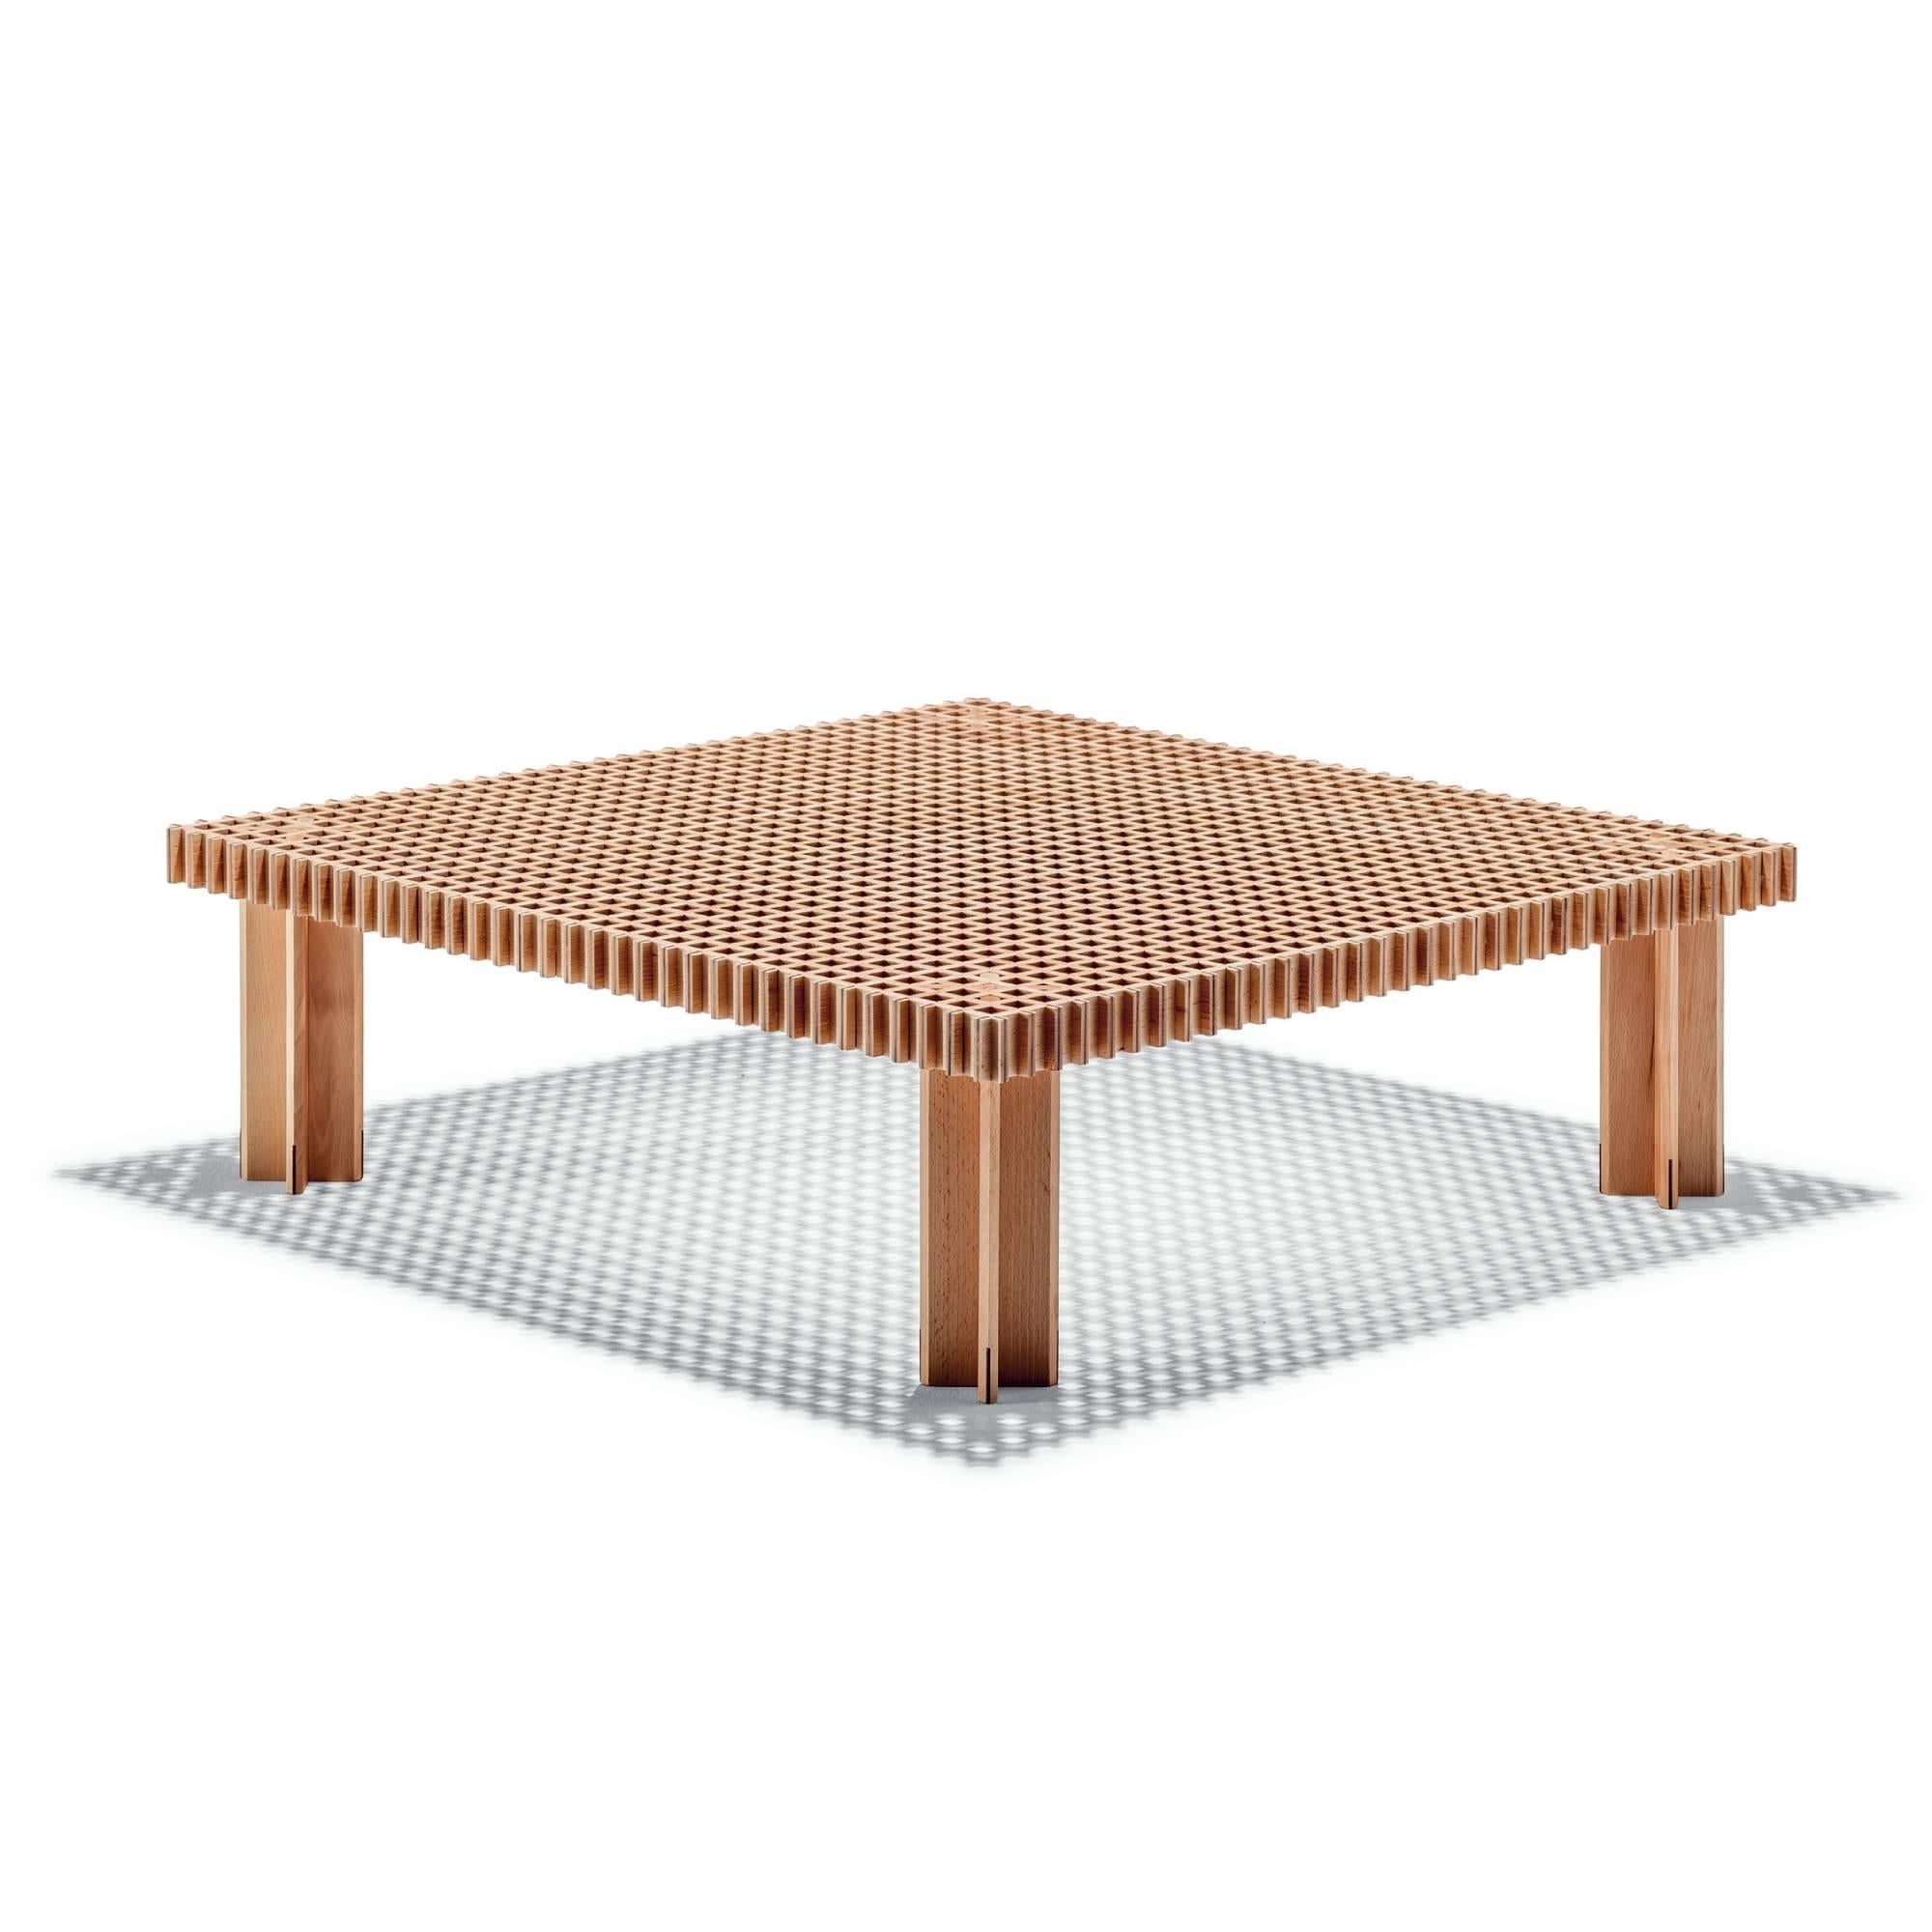 Understated and refined, the Kyoto table by architect and designer Gianfranco Frattini is the perfect blend of design vision and master craftsmanship.

In the early 70s, during a trip to Japan to study the work of the local craftsmen, Gianfranco